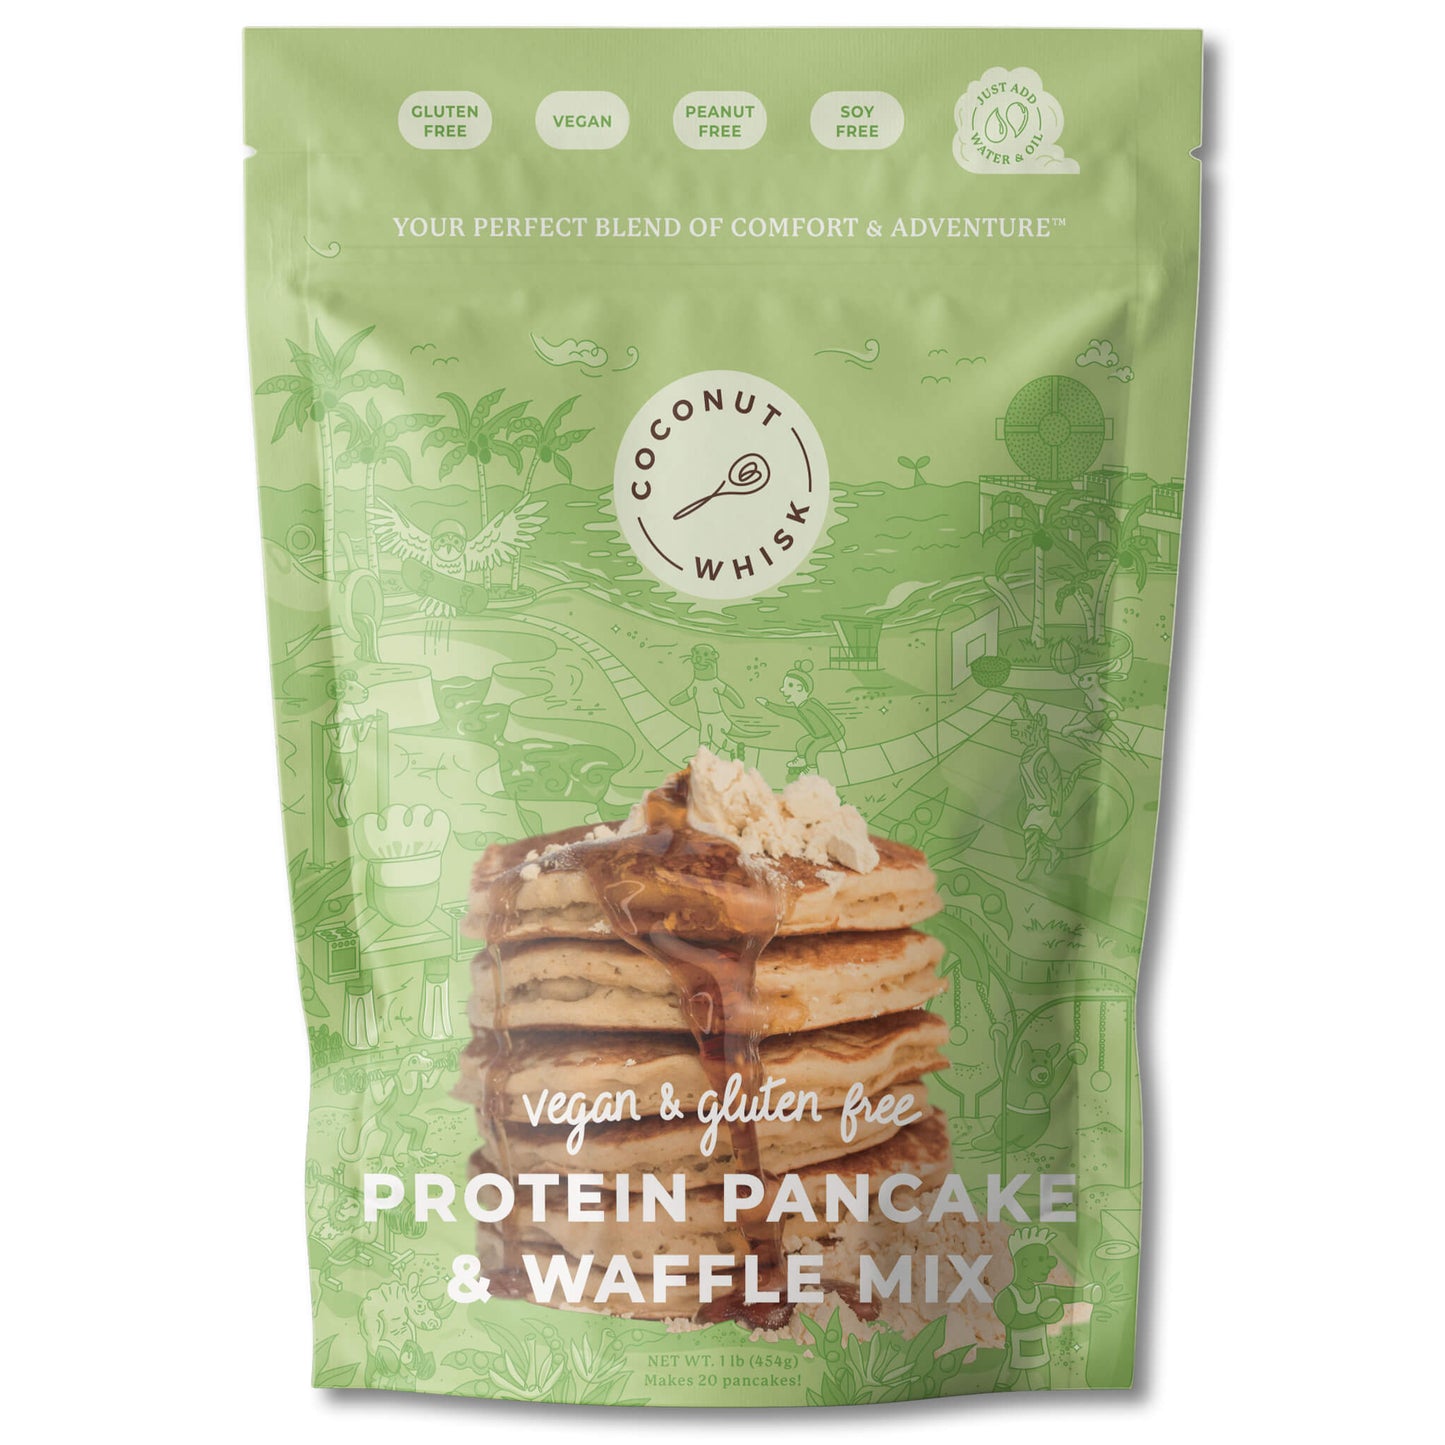 Protein Pancake & Waffle Mix - Coconut Whisk Protein Pancake & Waffle Mix Baking Mixes